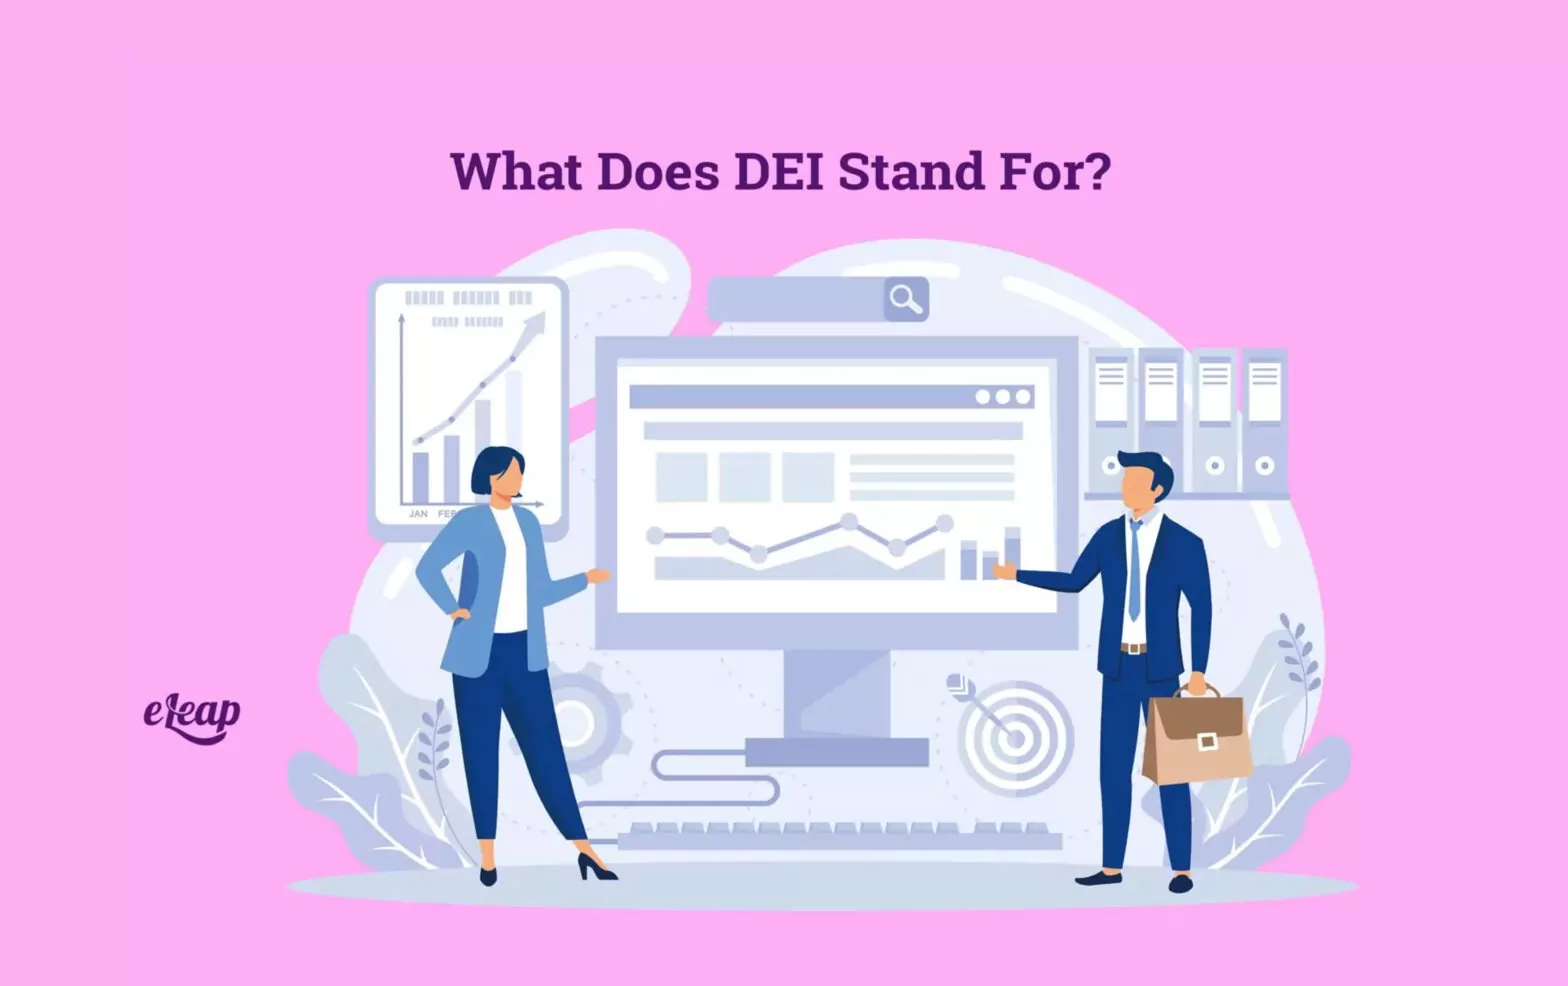 What Does DEI Stand For?